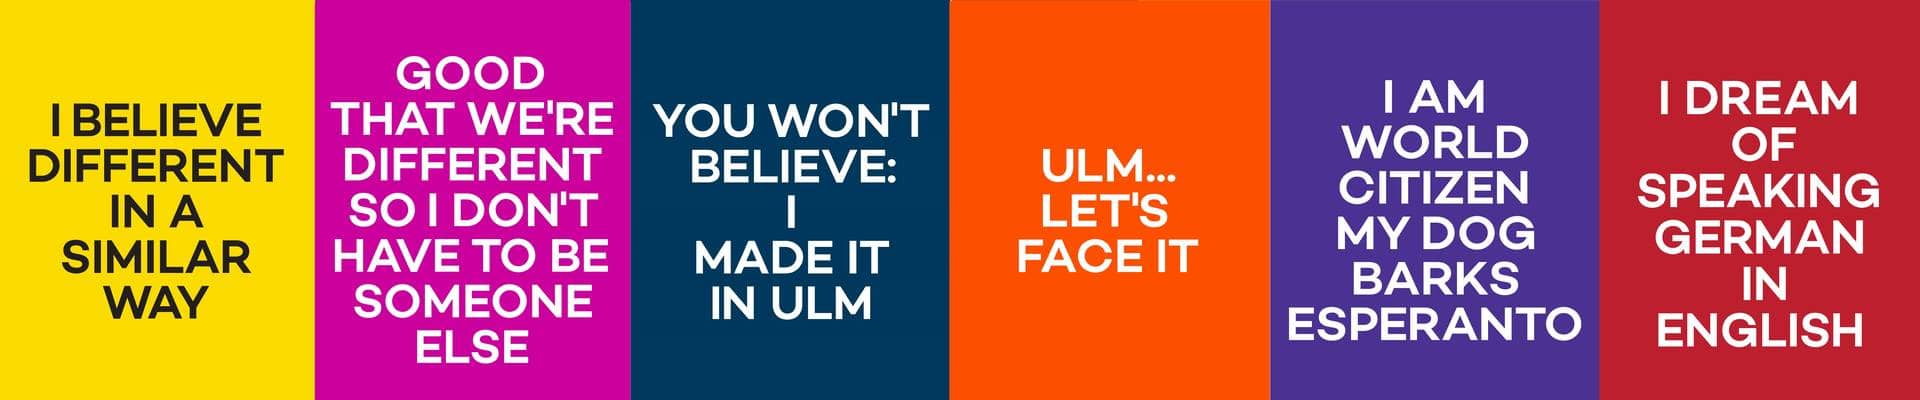 Poster of the Ulm campaign